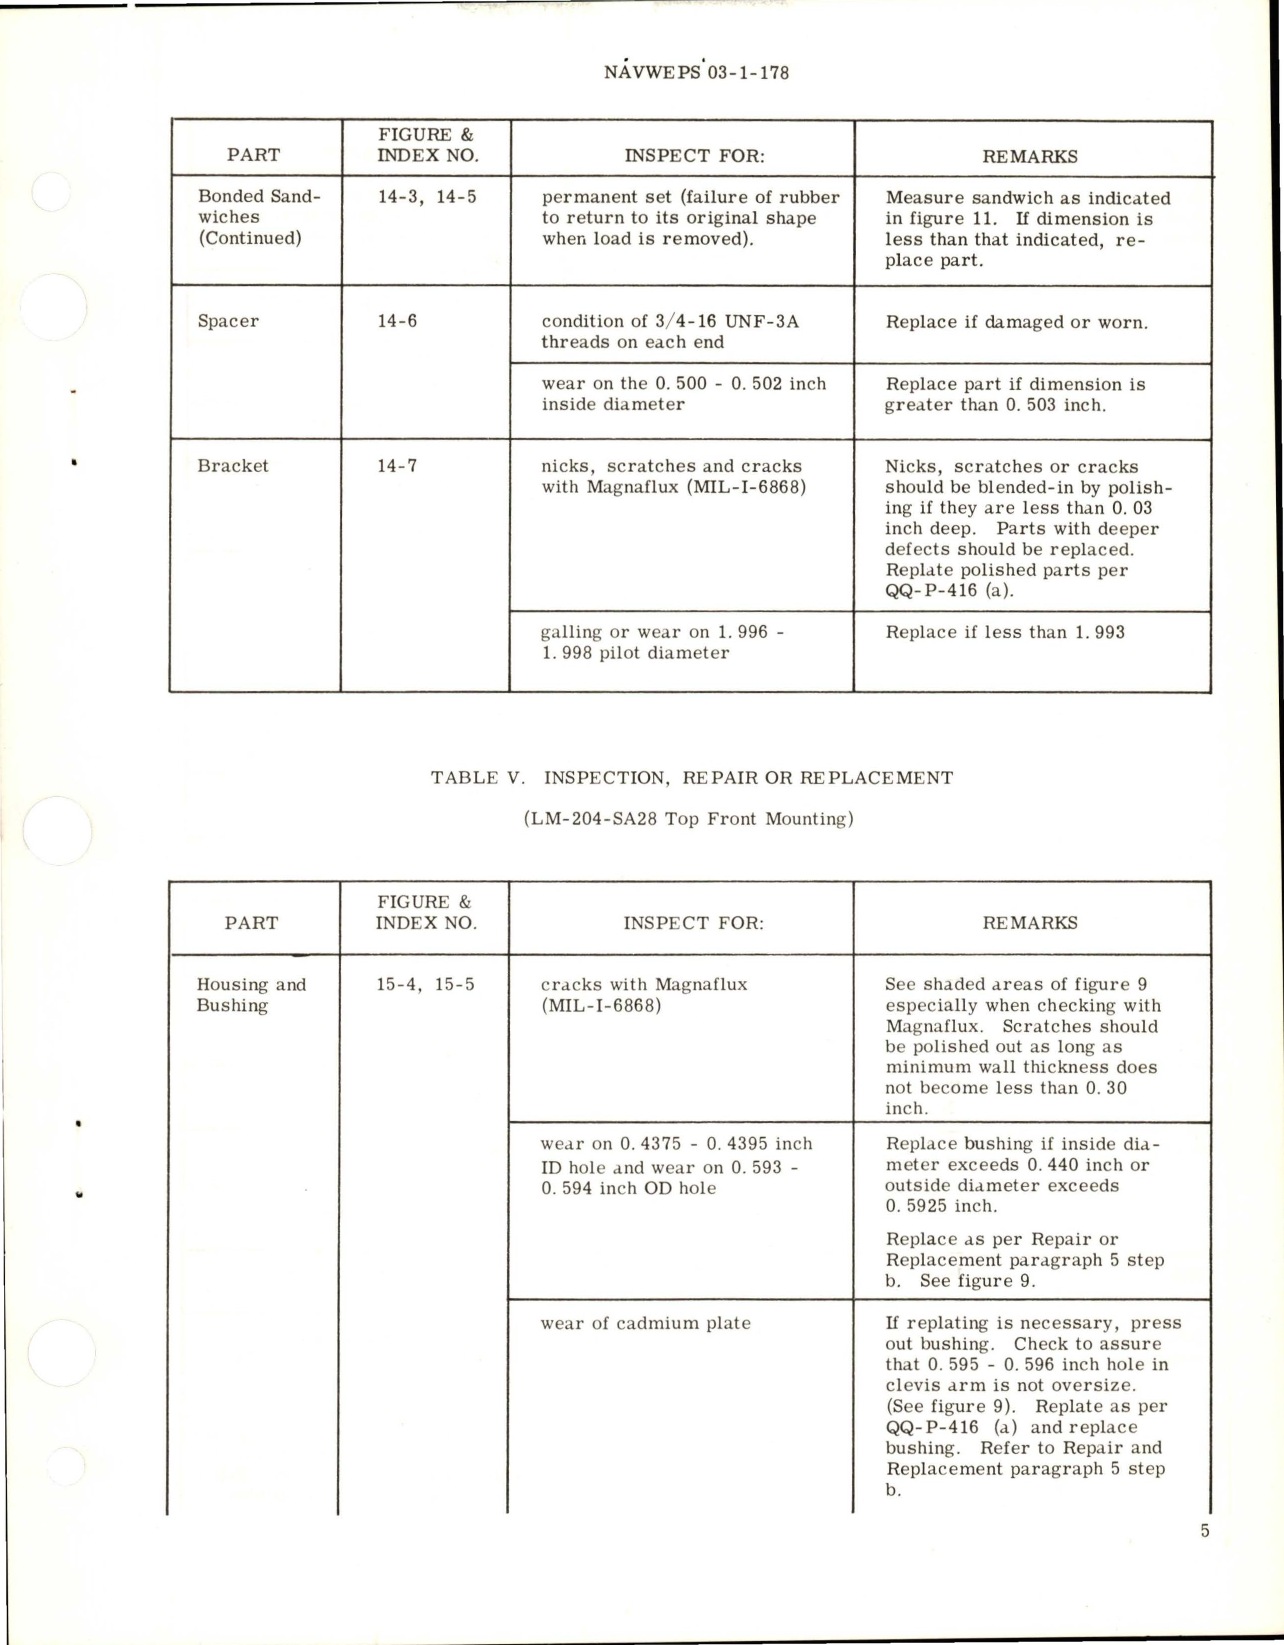 Sample page 7 from AirCorps Library document: Overhaul Instructions with Illustrated Parts Breakdown for Dynafocal Engine Mountings 